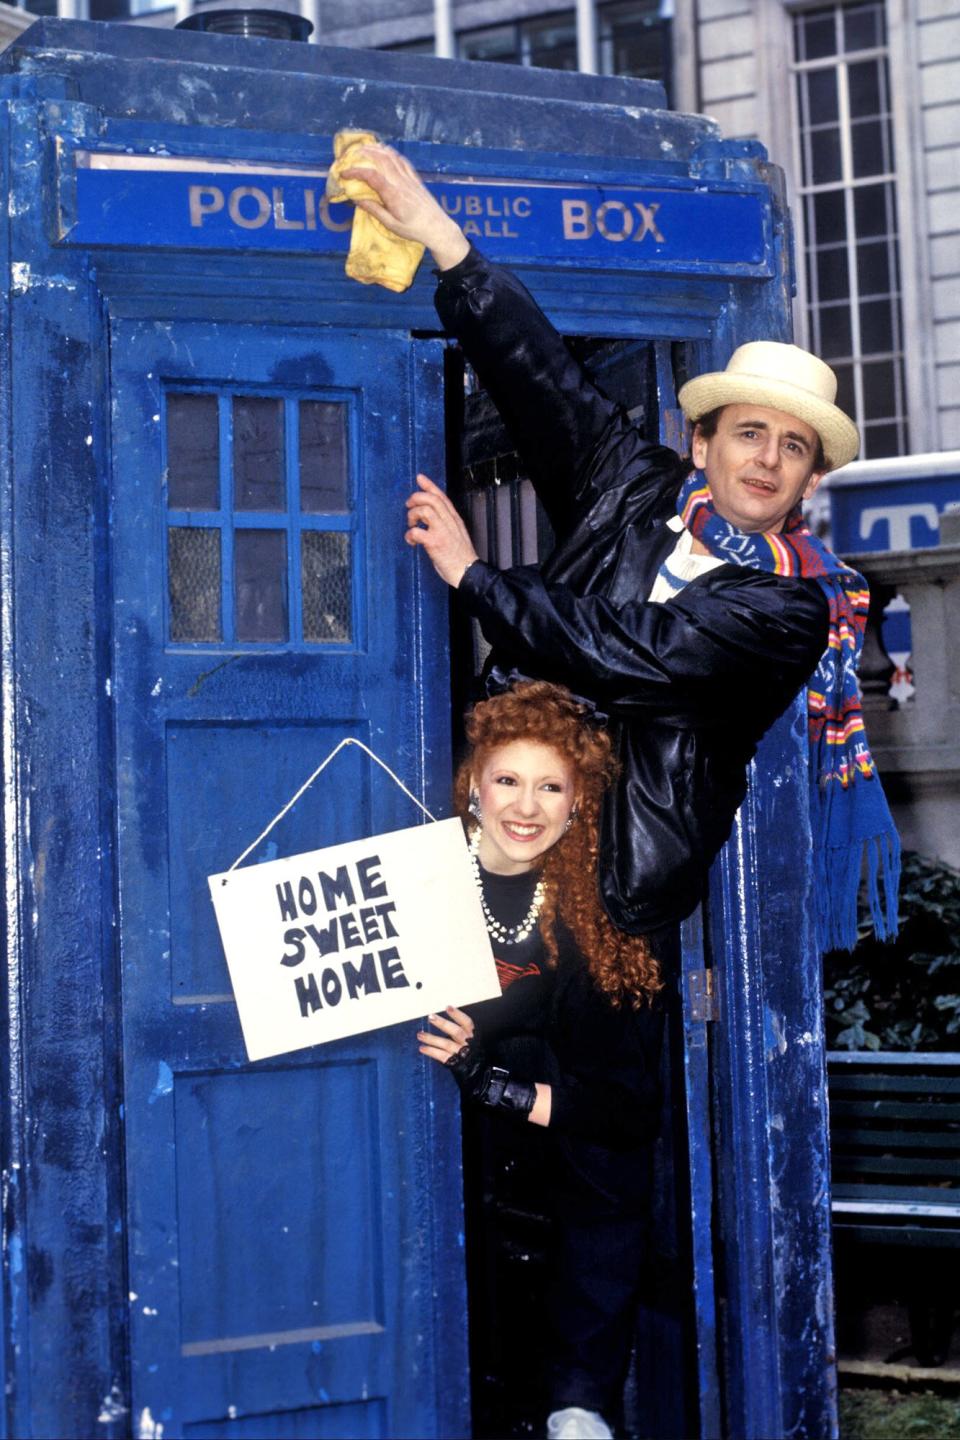 02.03.1987. British Actor Sylvester Mccoy Who Plays The Doctor In The Bbc Television Series Dr Who. Pictured Here With His Assistant Melanie Played By Bonnie Langford. (Photo by Avalon/Getty Images)